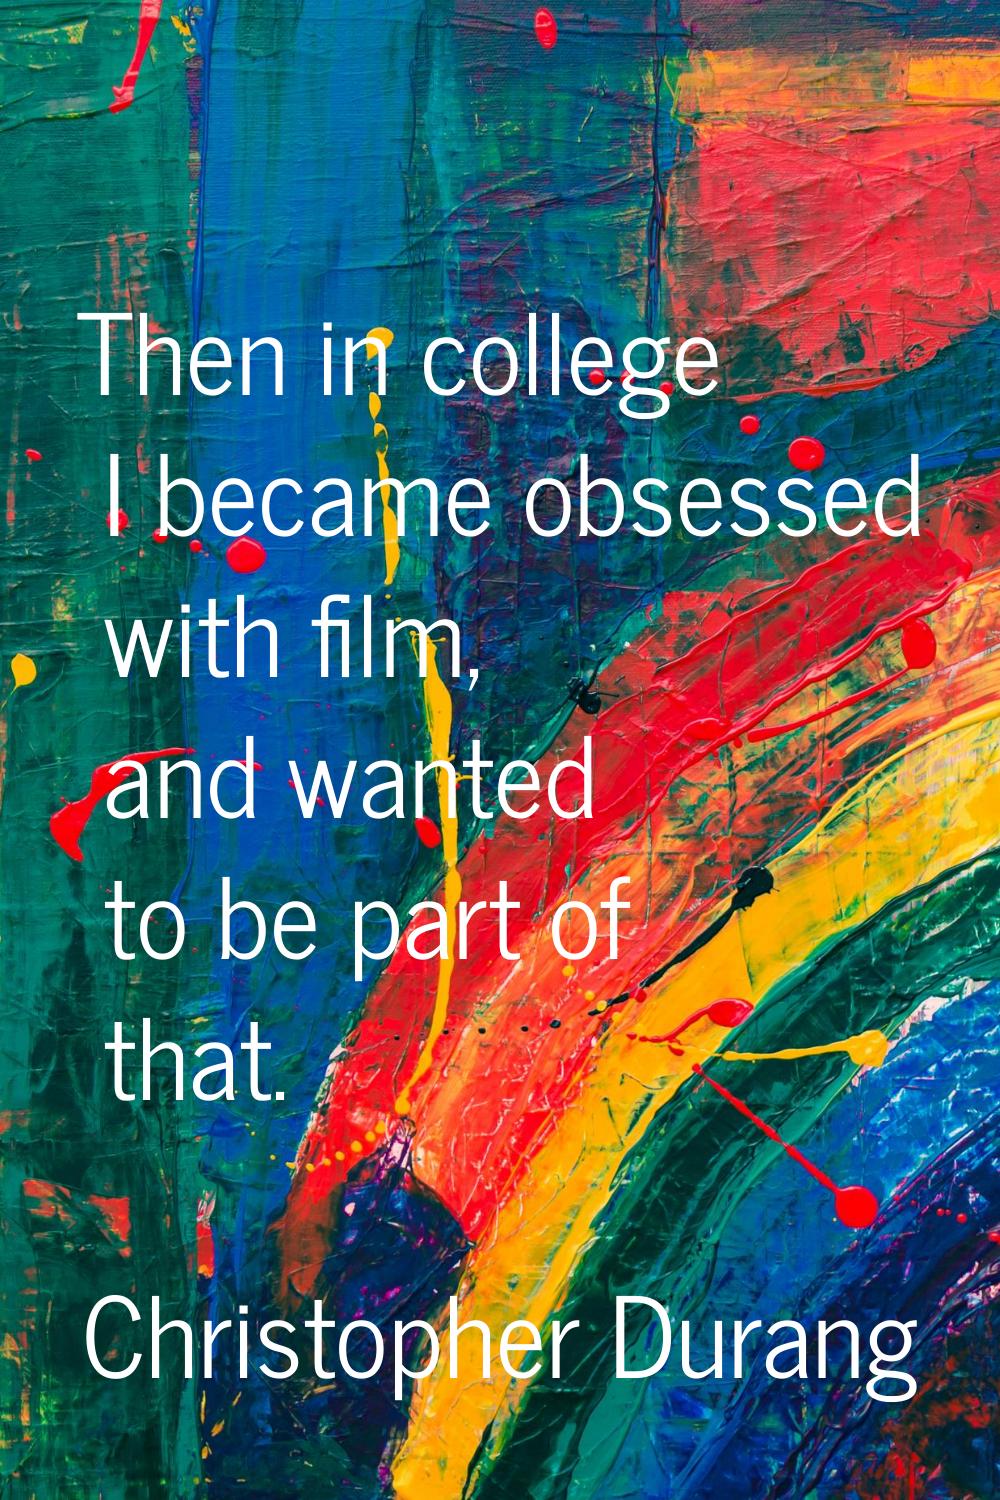 Then in college I became obsessed with film, and wanted to be part of that.